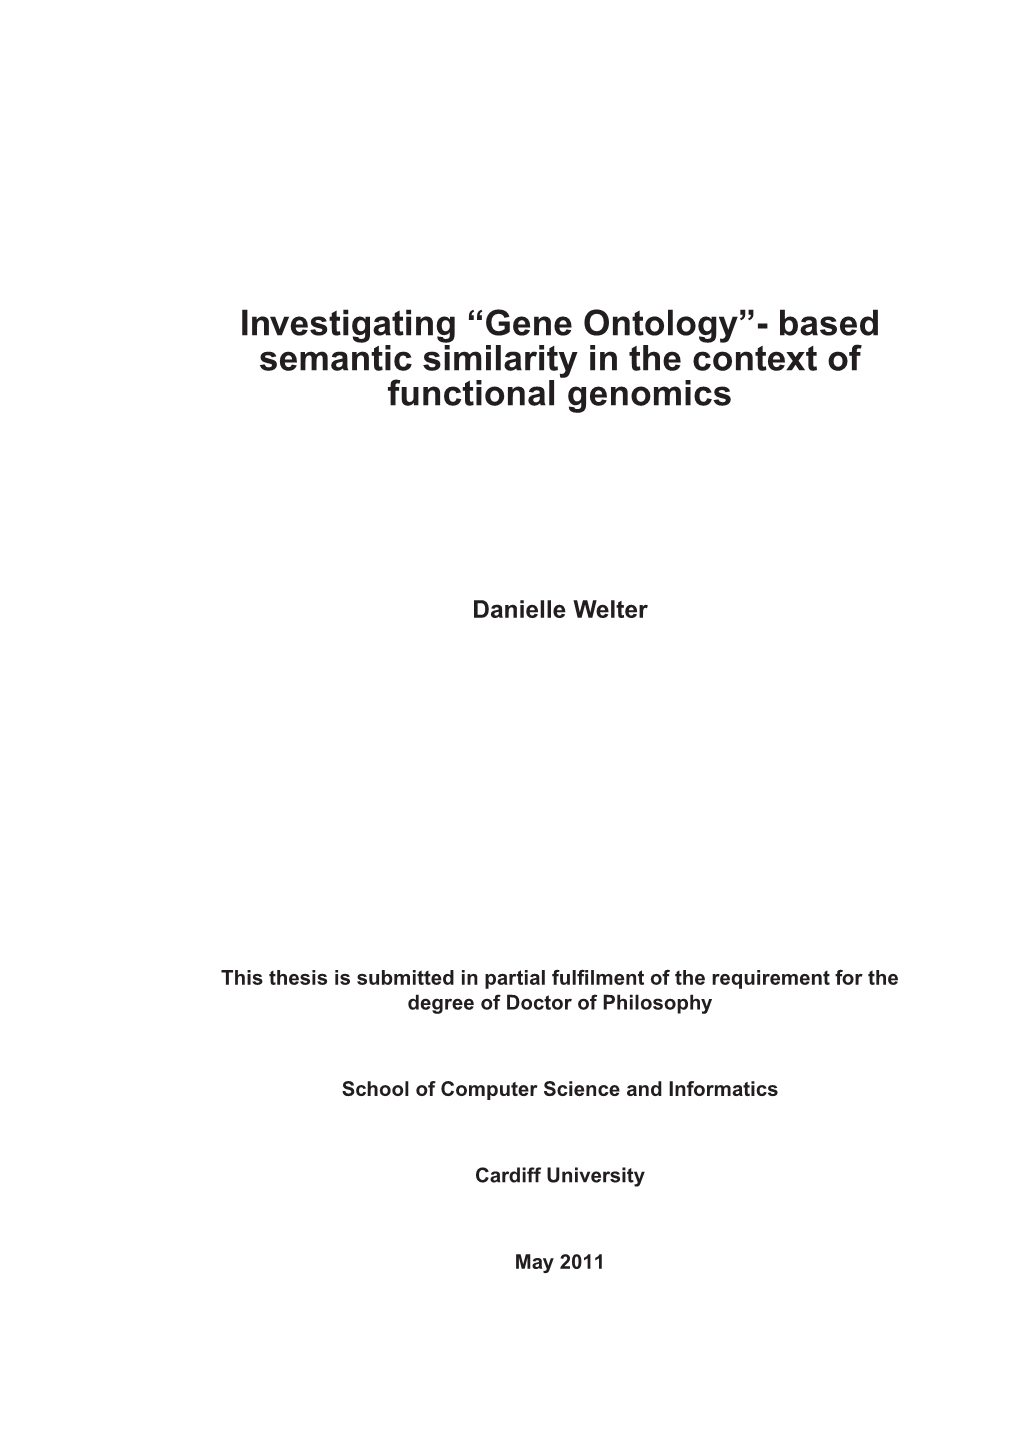 “Gene Ontology”- Based Semantic Similarity in the Context of Functional Genomics